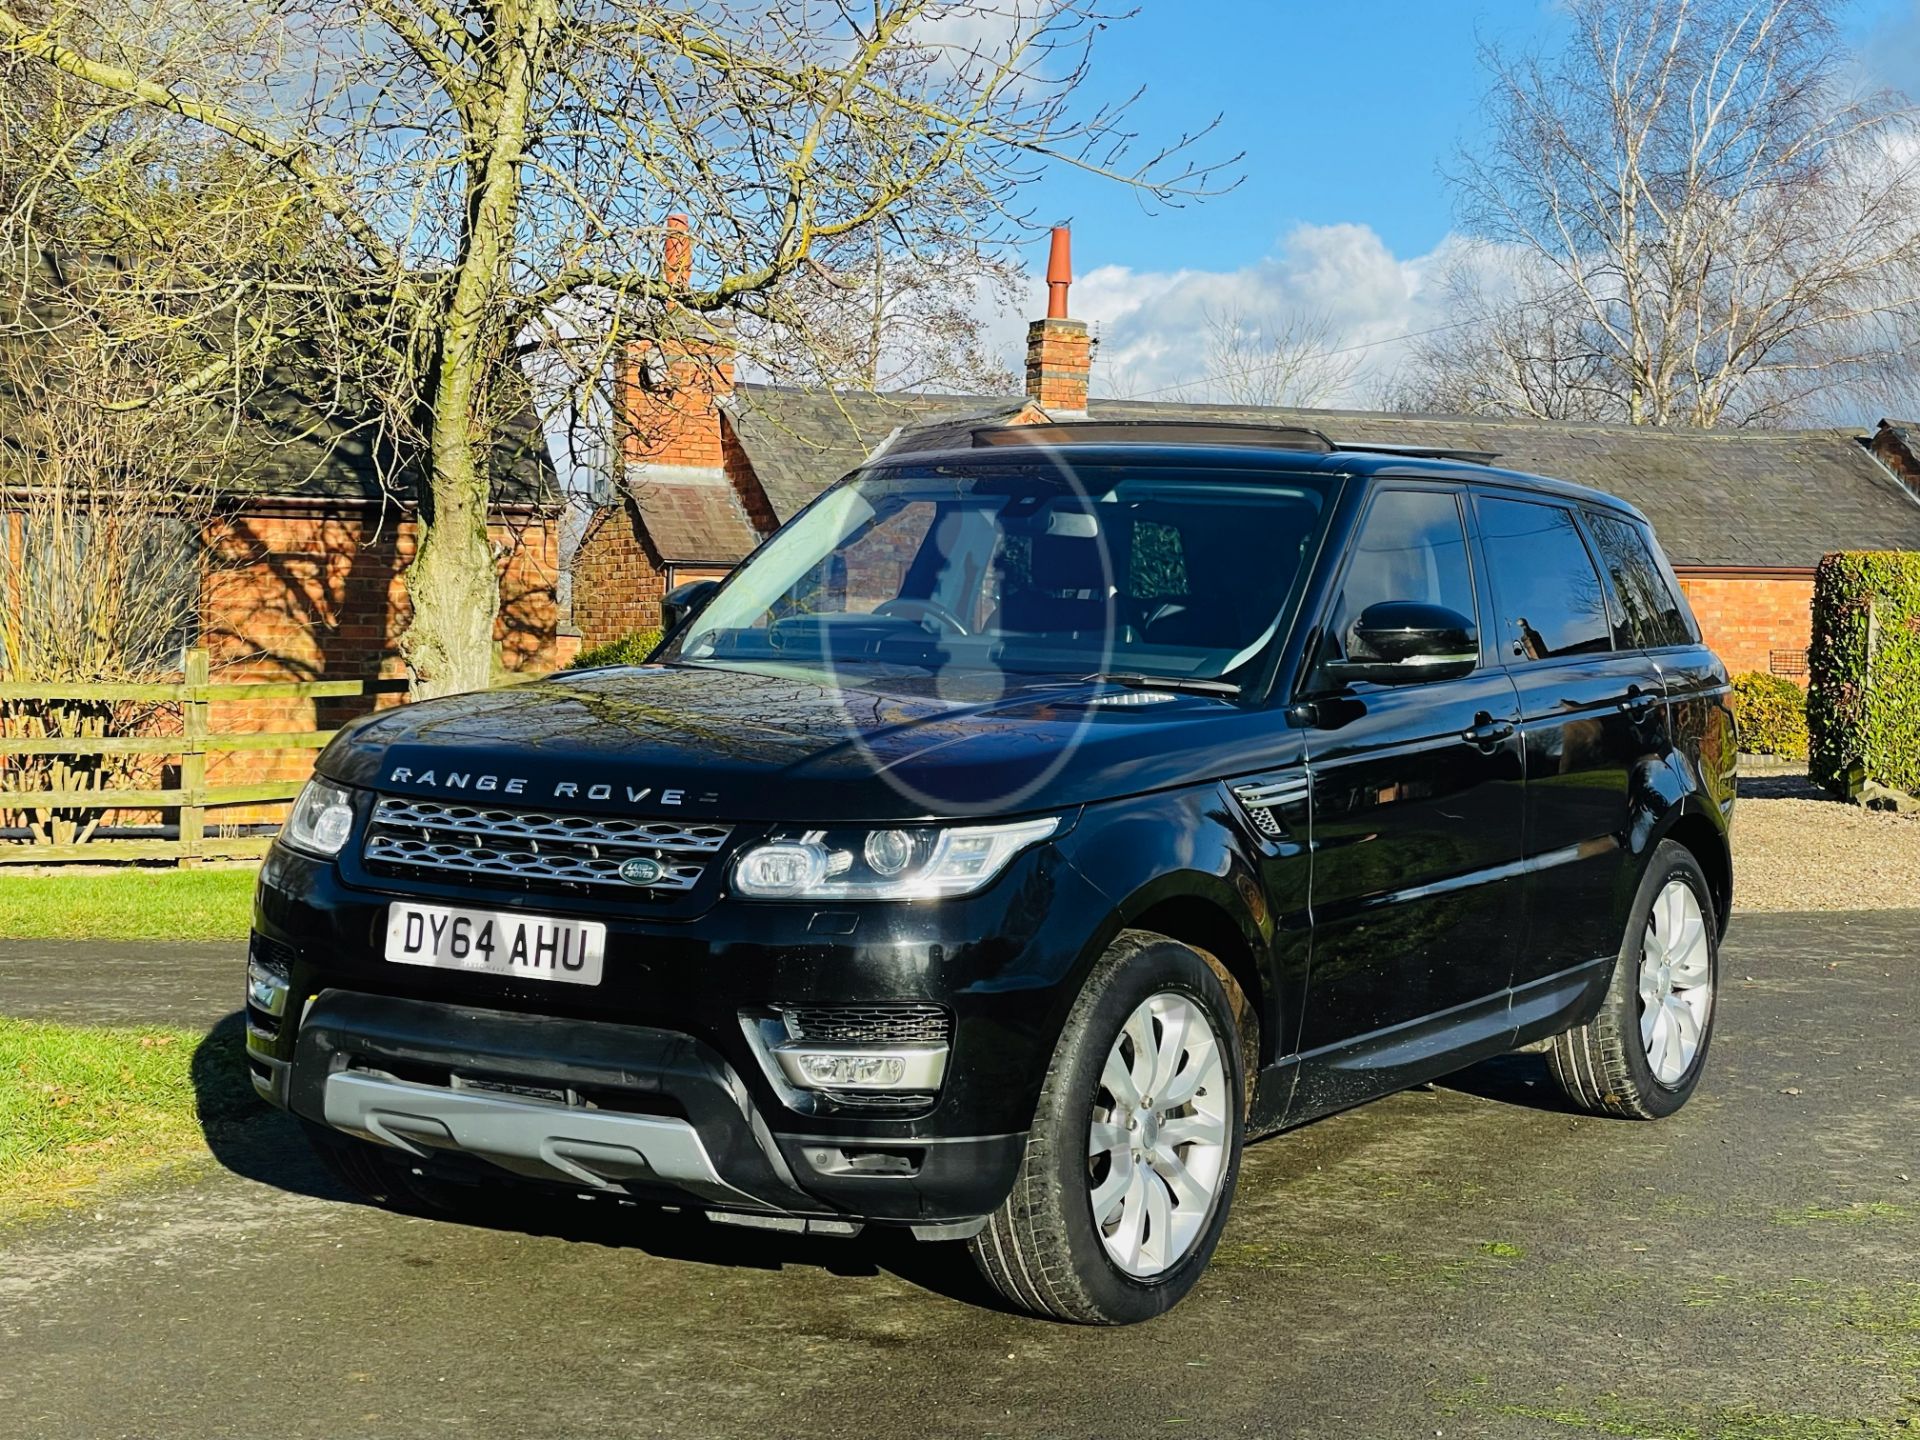 RANGE ROVER SPORT *HSE* SUV (2015 MODEL) 3.0 SDV6 - 8 SPEED AUTO *PAN ROOF - FULLY LOADED* (NO VAT) - Image 2 of 62